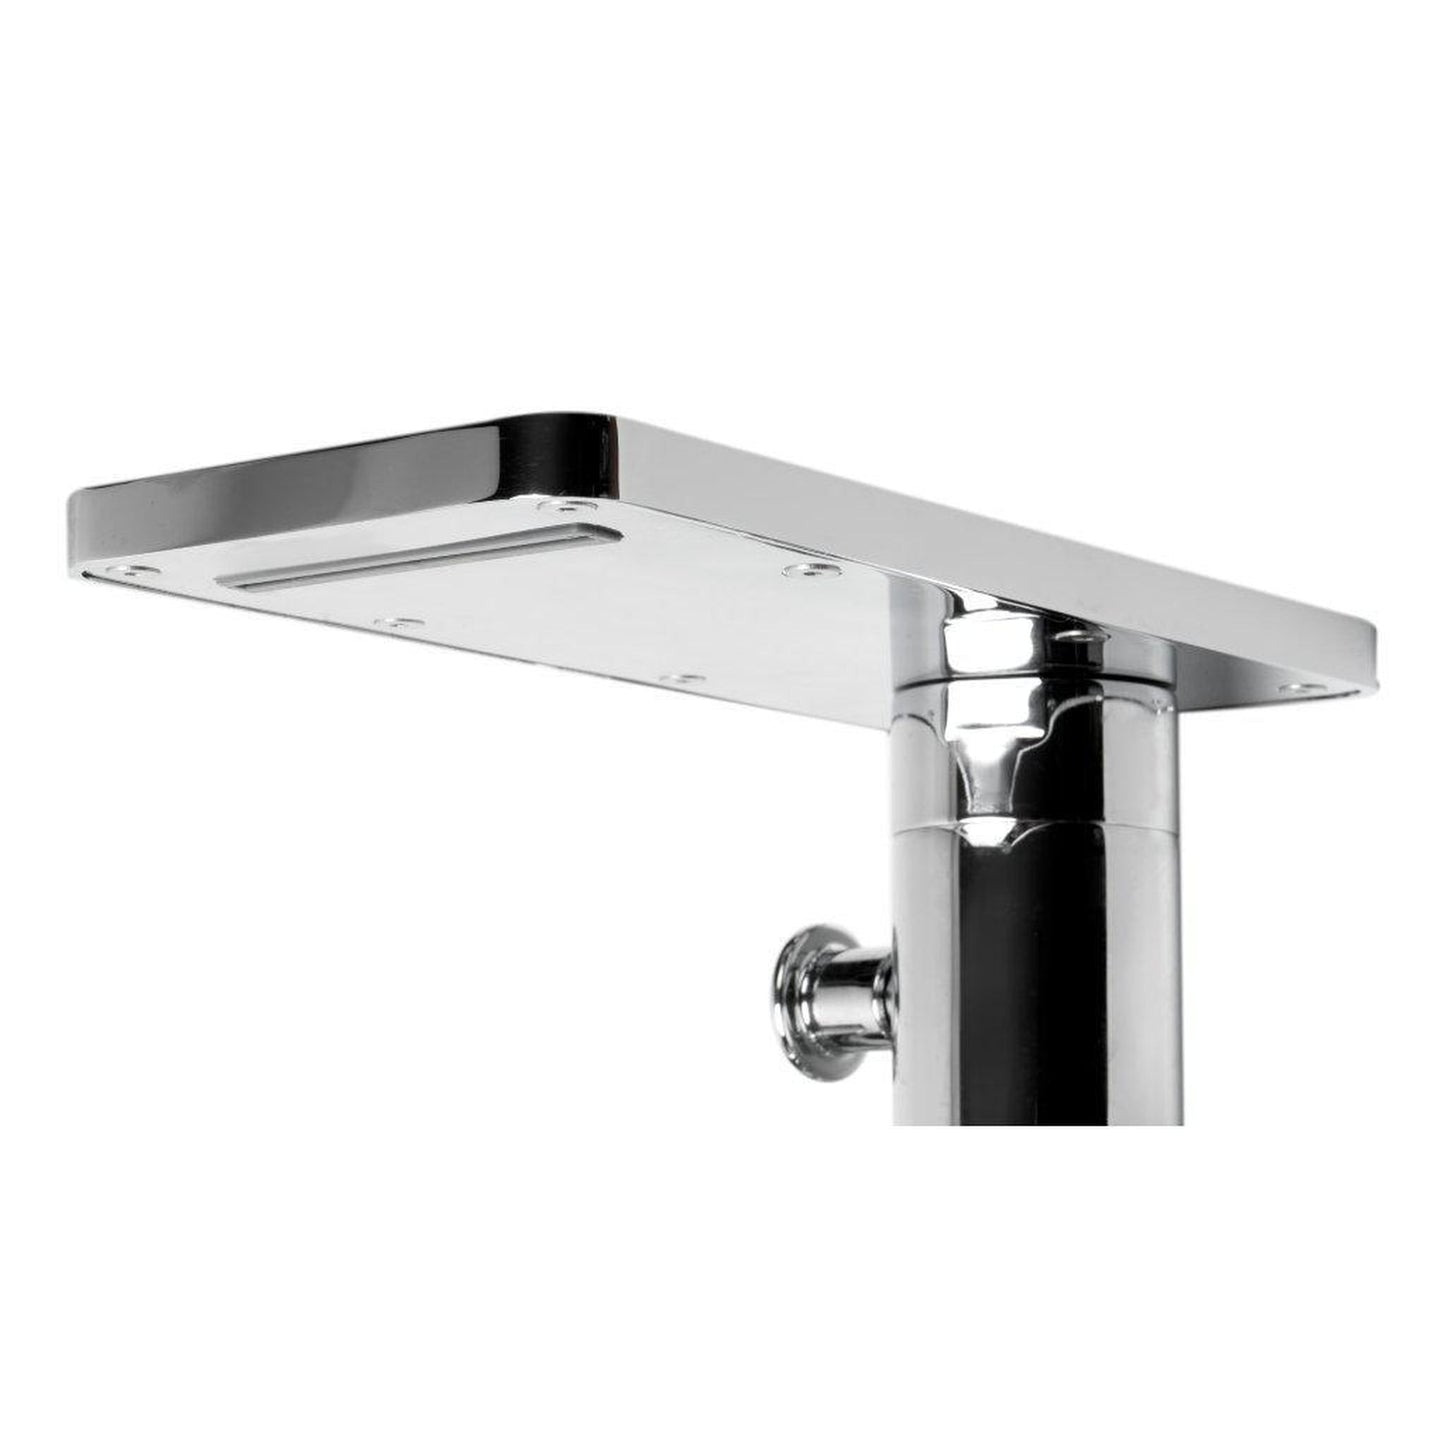 ALFI Brand AB2875-PC Polished Chrome Freestanding Floor Mounted Bath Tub Filler With Hand Held Shower Head